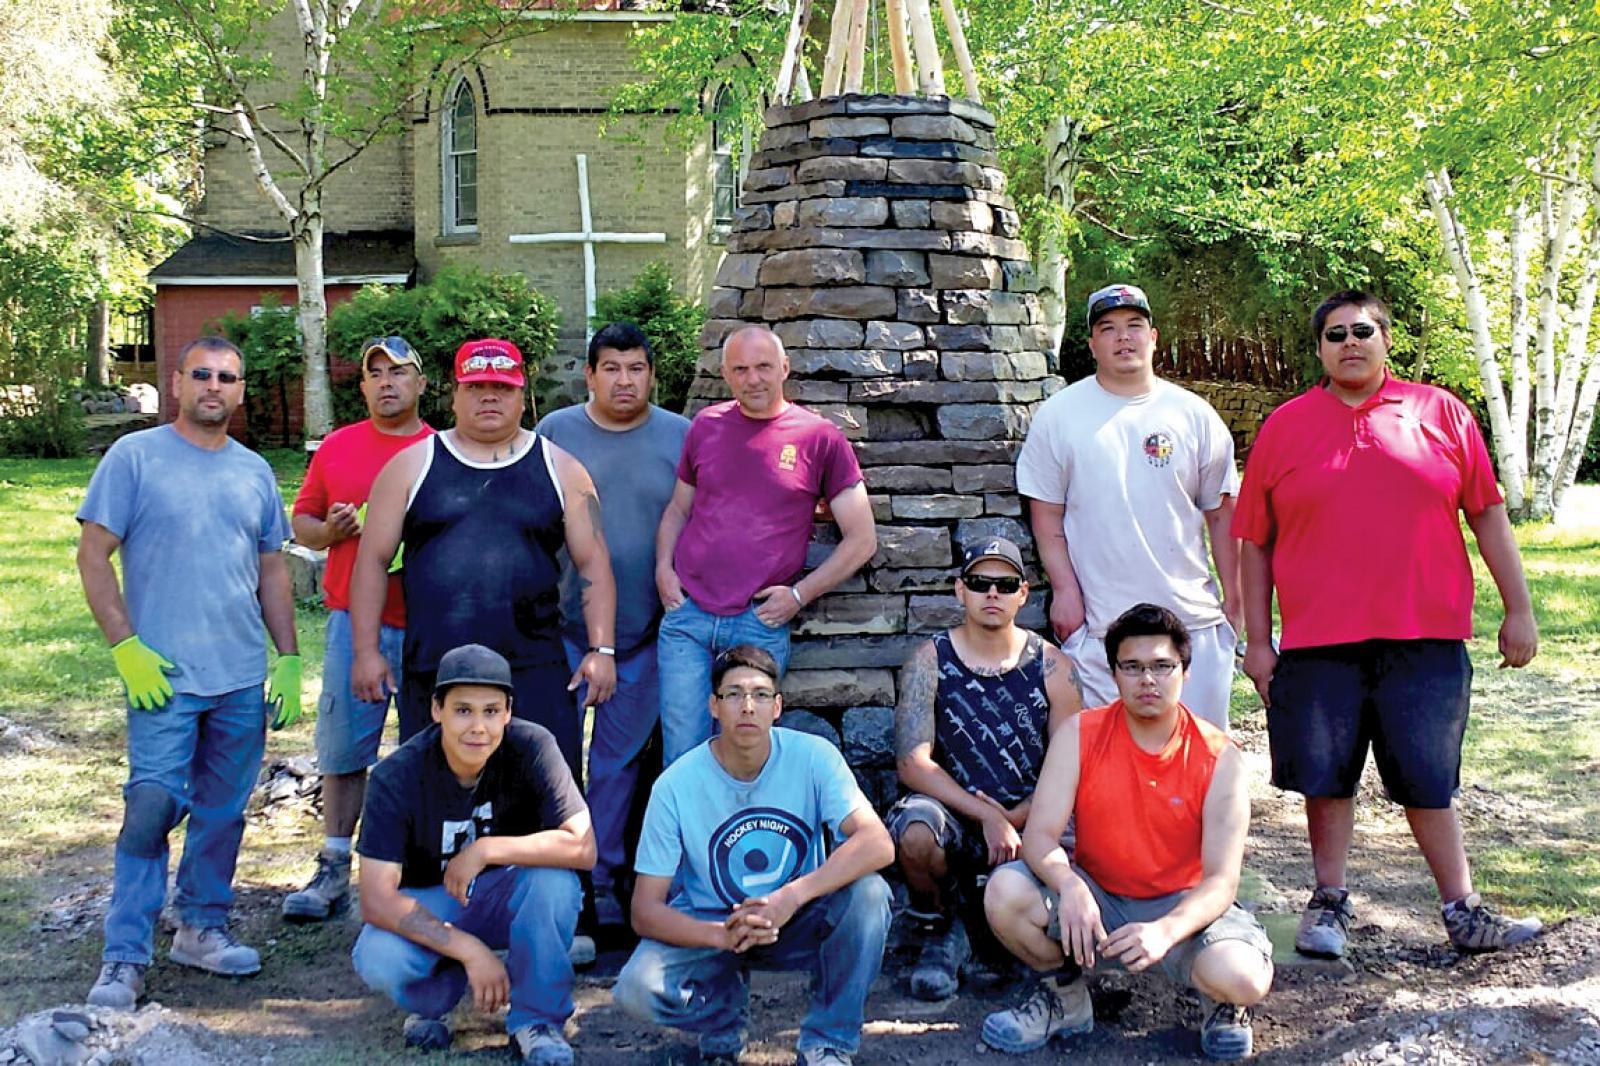 The new dry stone teepee is a memorial built by the men in remembrance of the missing First Nation women. It will be circled by a garden and planted.